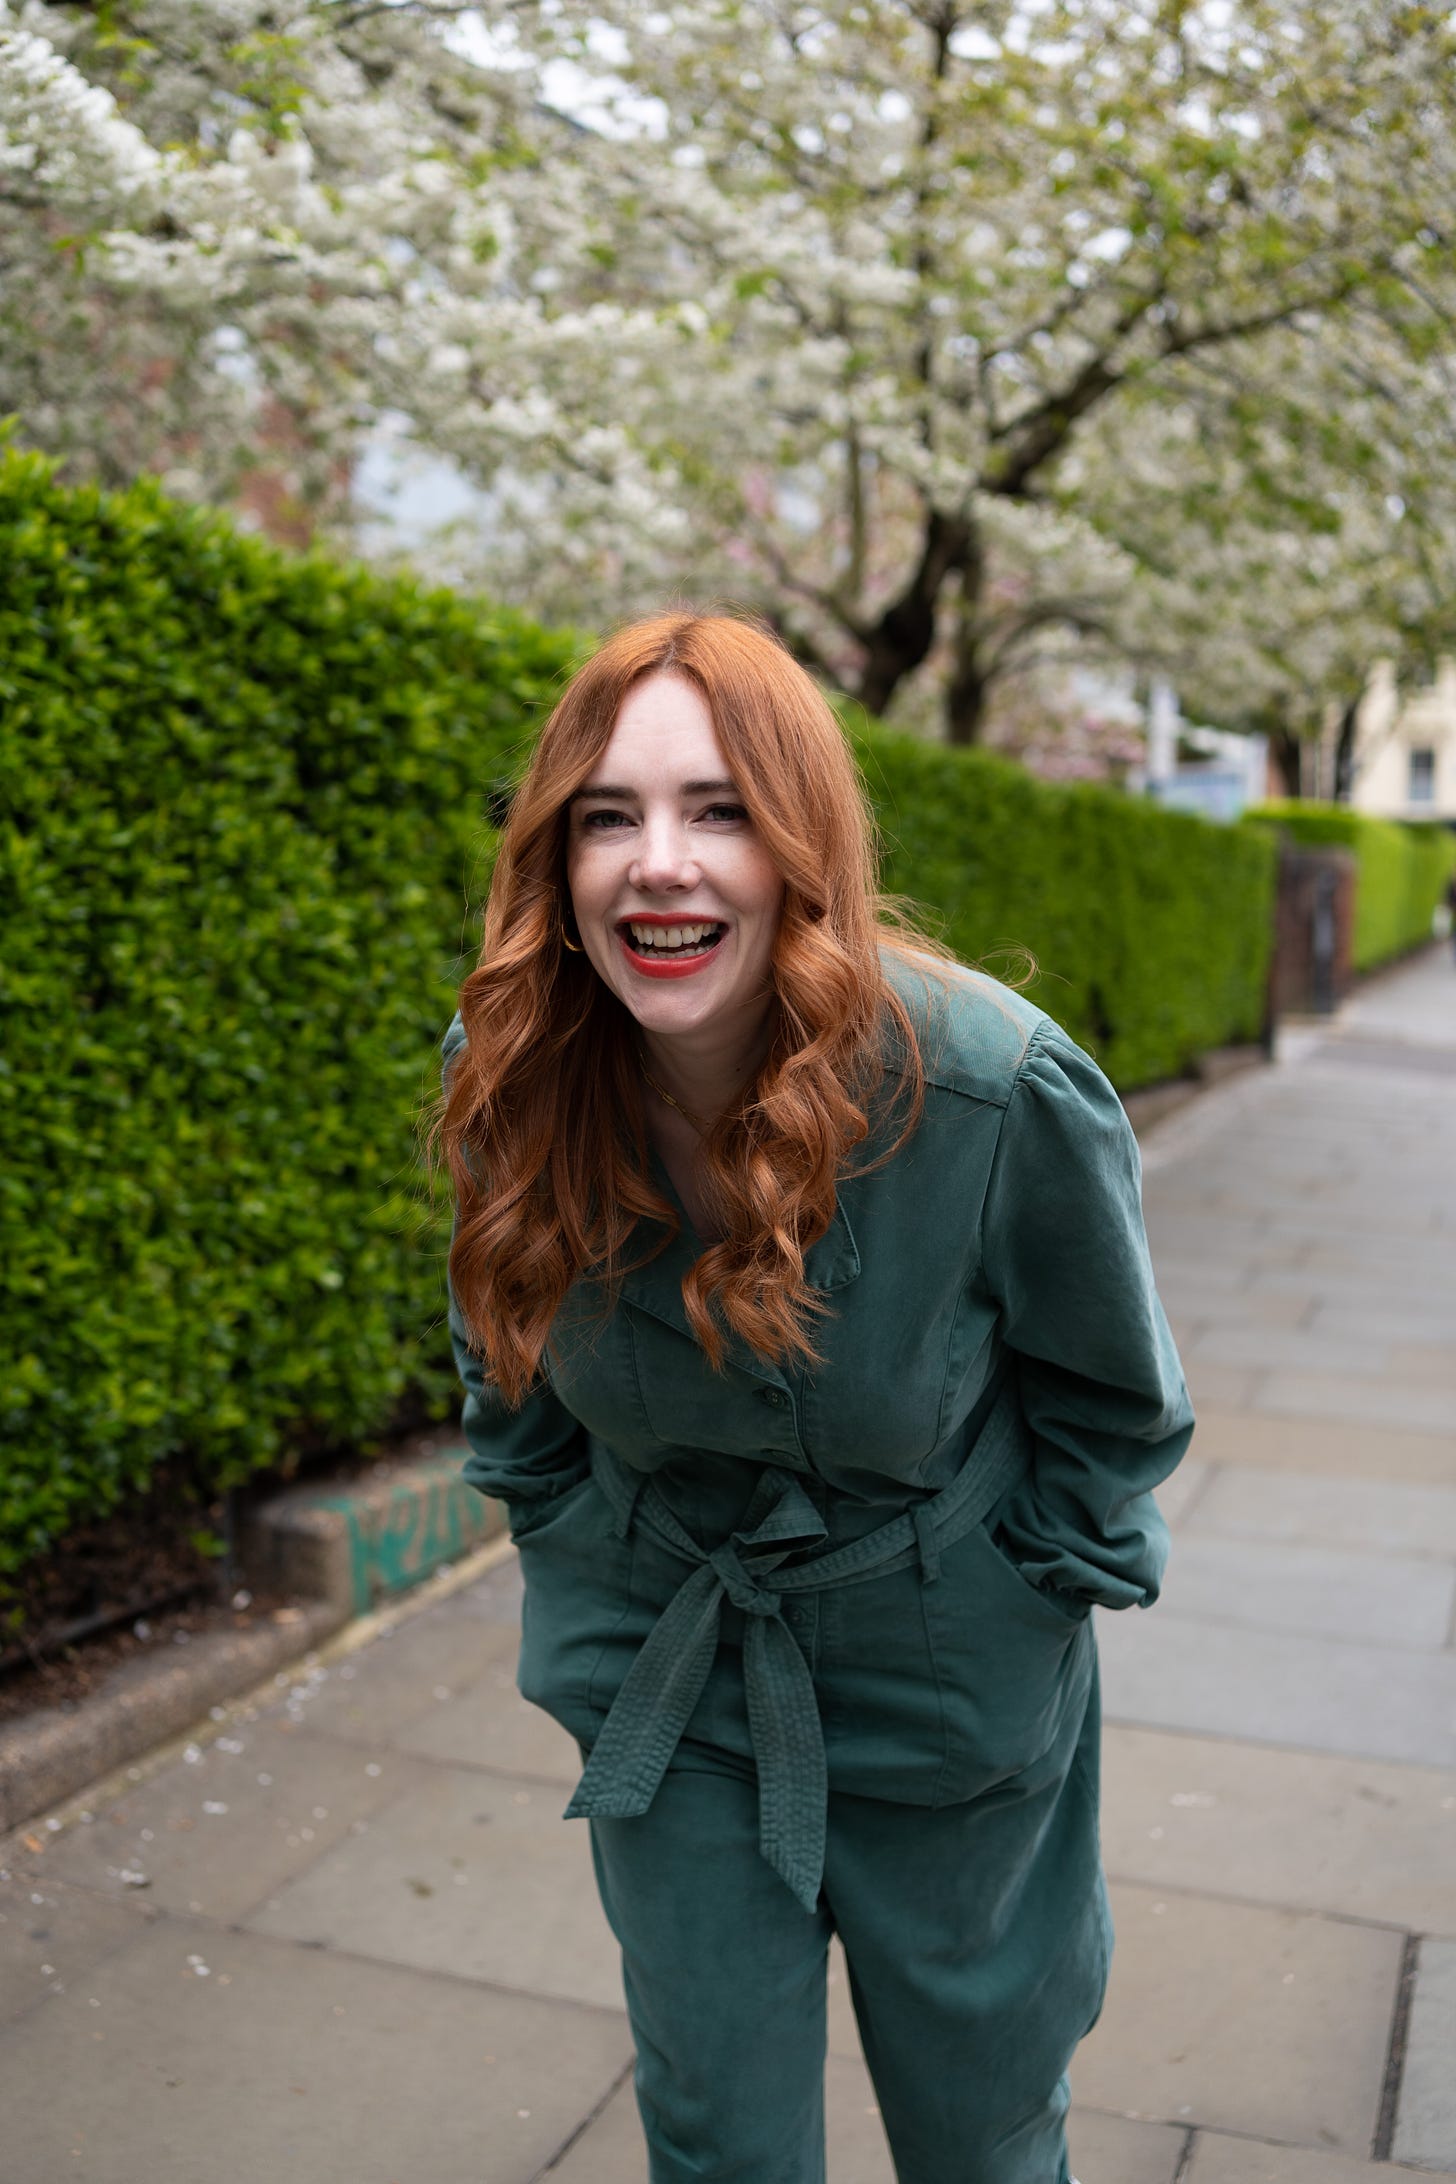 Allie is leaning forward and laughing. She is standing on pavement next to a long green hedge with blossom trees in the background. She's wearing a green jumpsuit. 